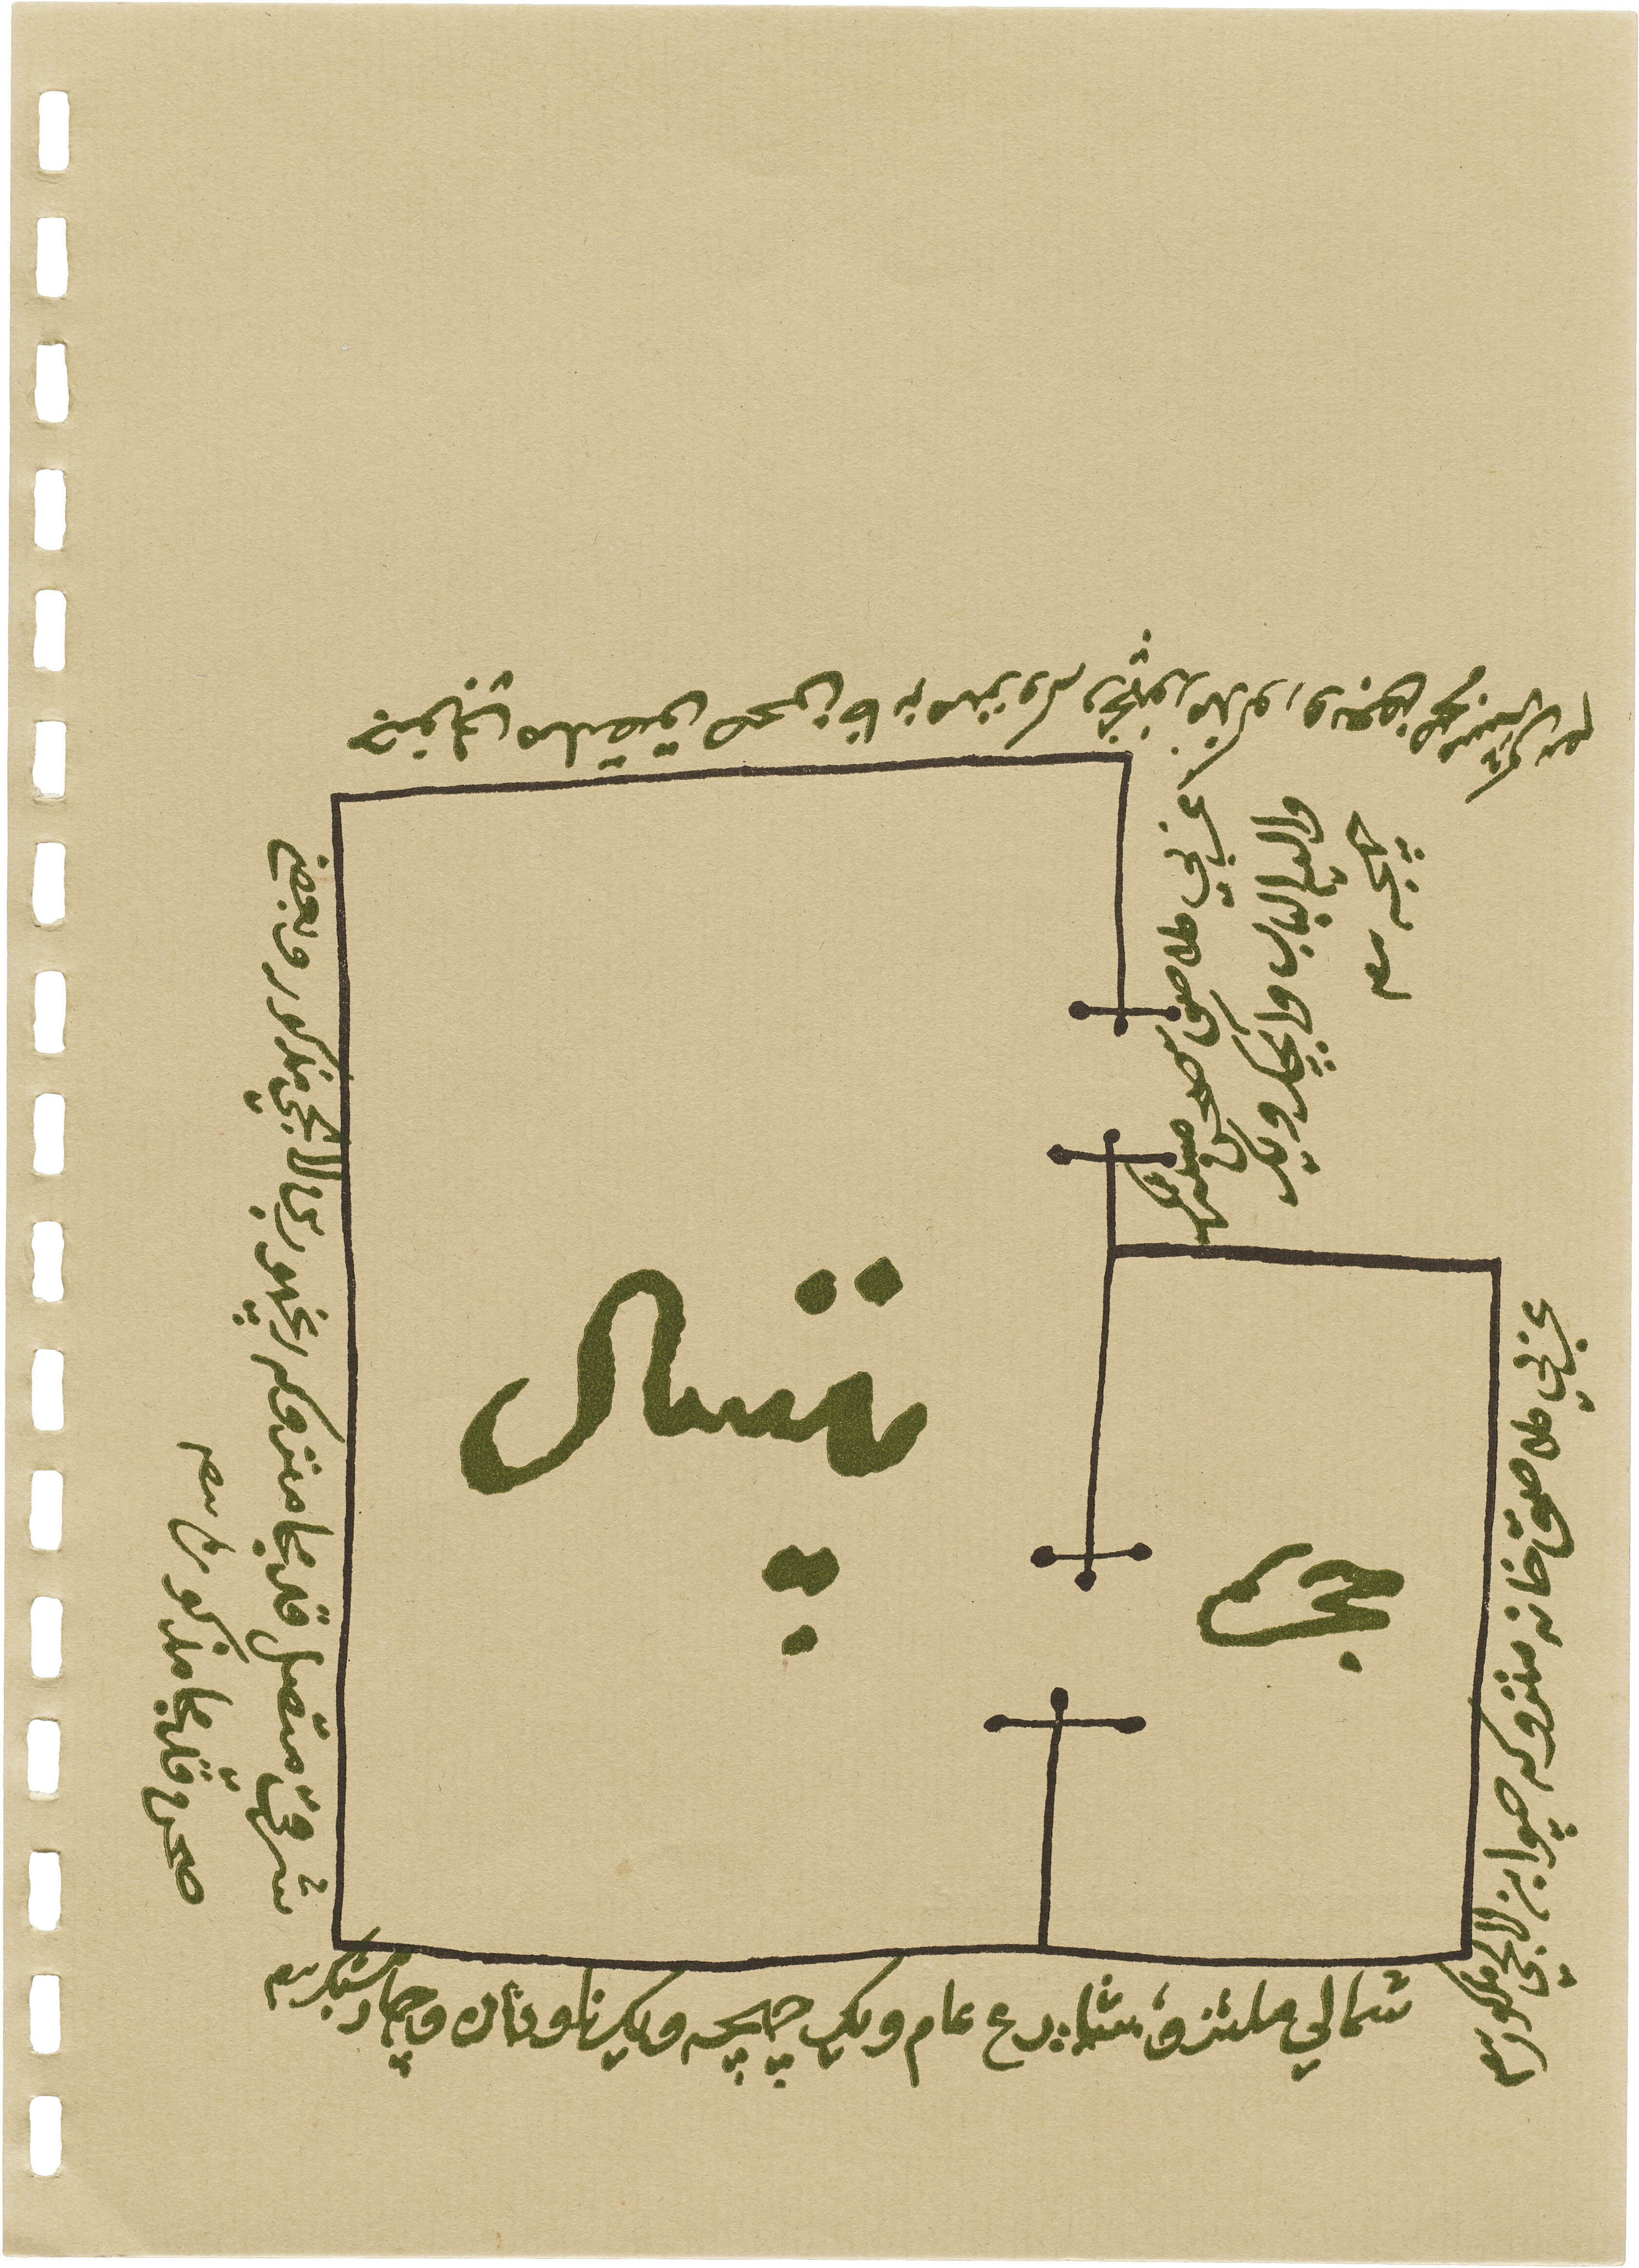 Document of sale of a plot of land, showing plan. Flexibility and decorativeness are among the chief characteristics of the Urdu script. Ink on waxed fabric.